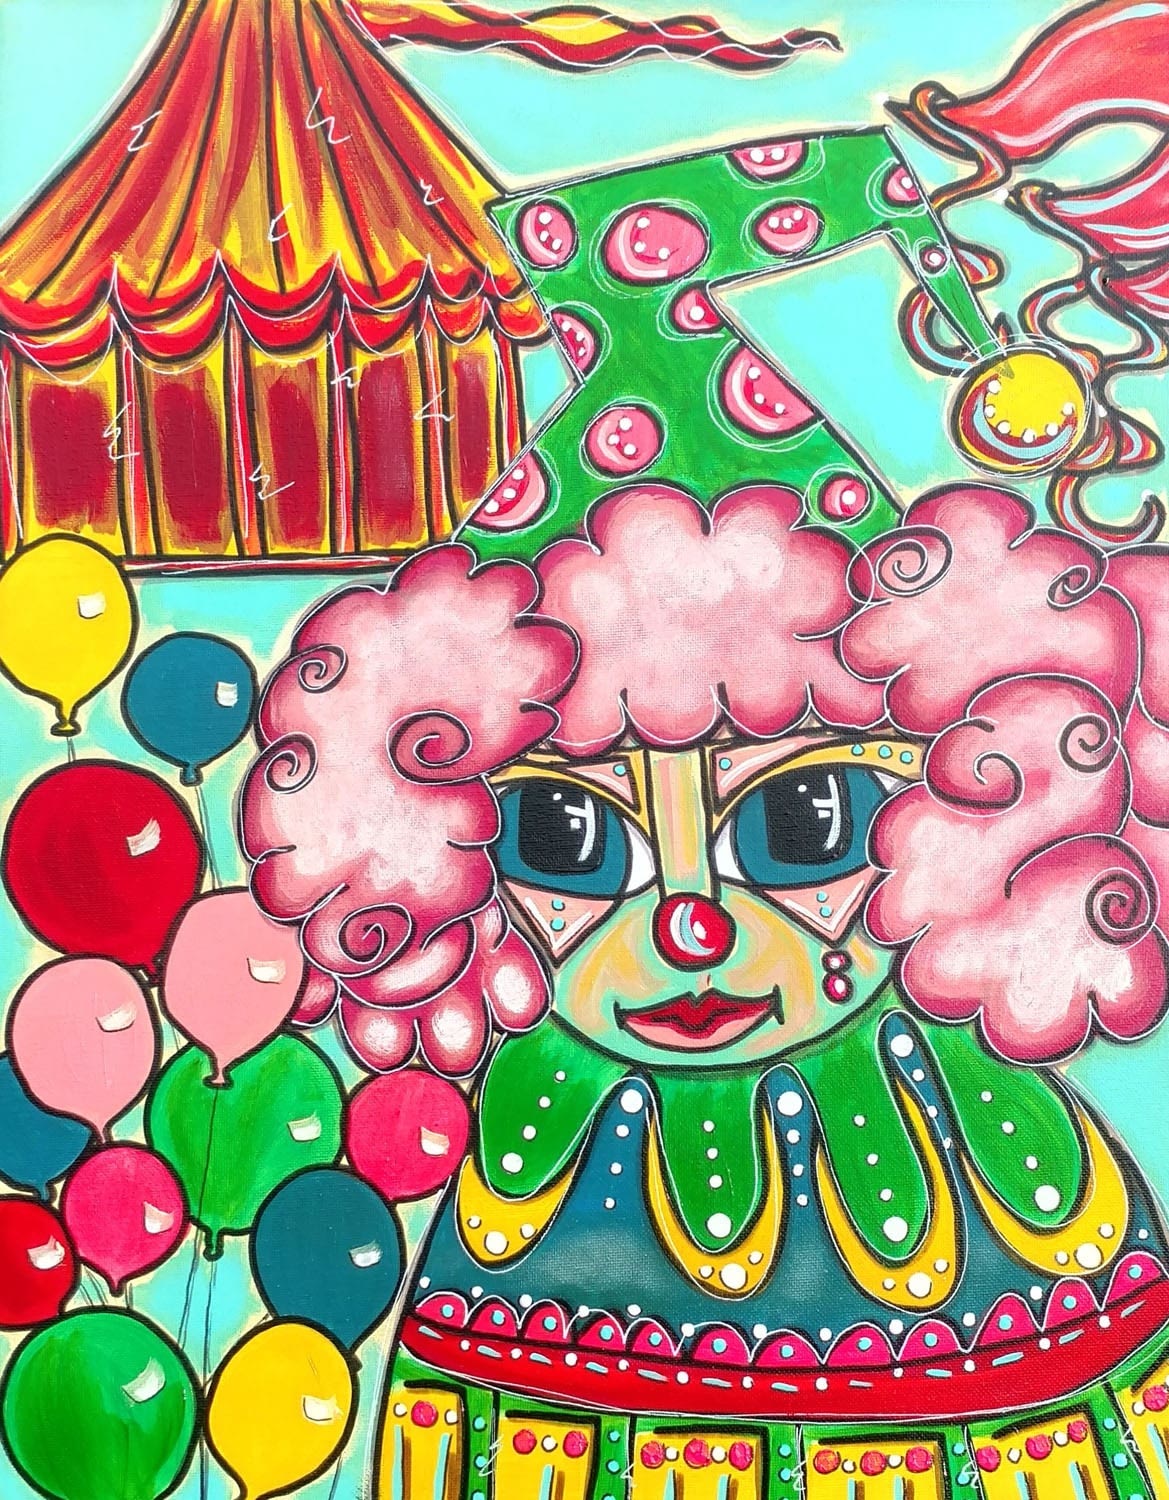 a clown with pink hair and green hat selling colorful balloons